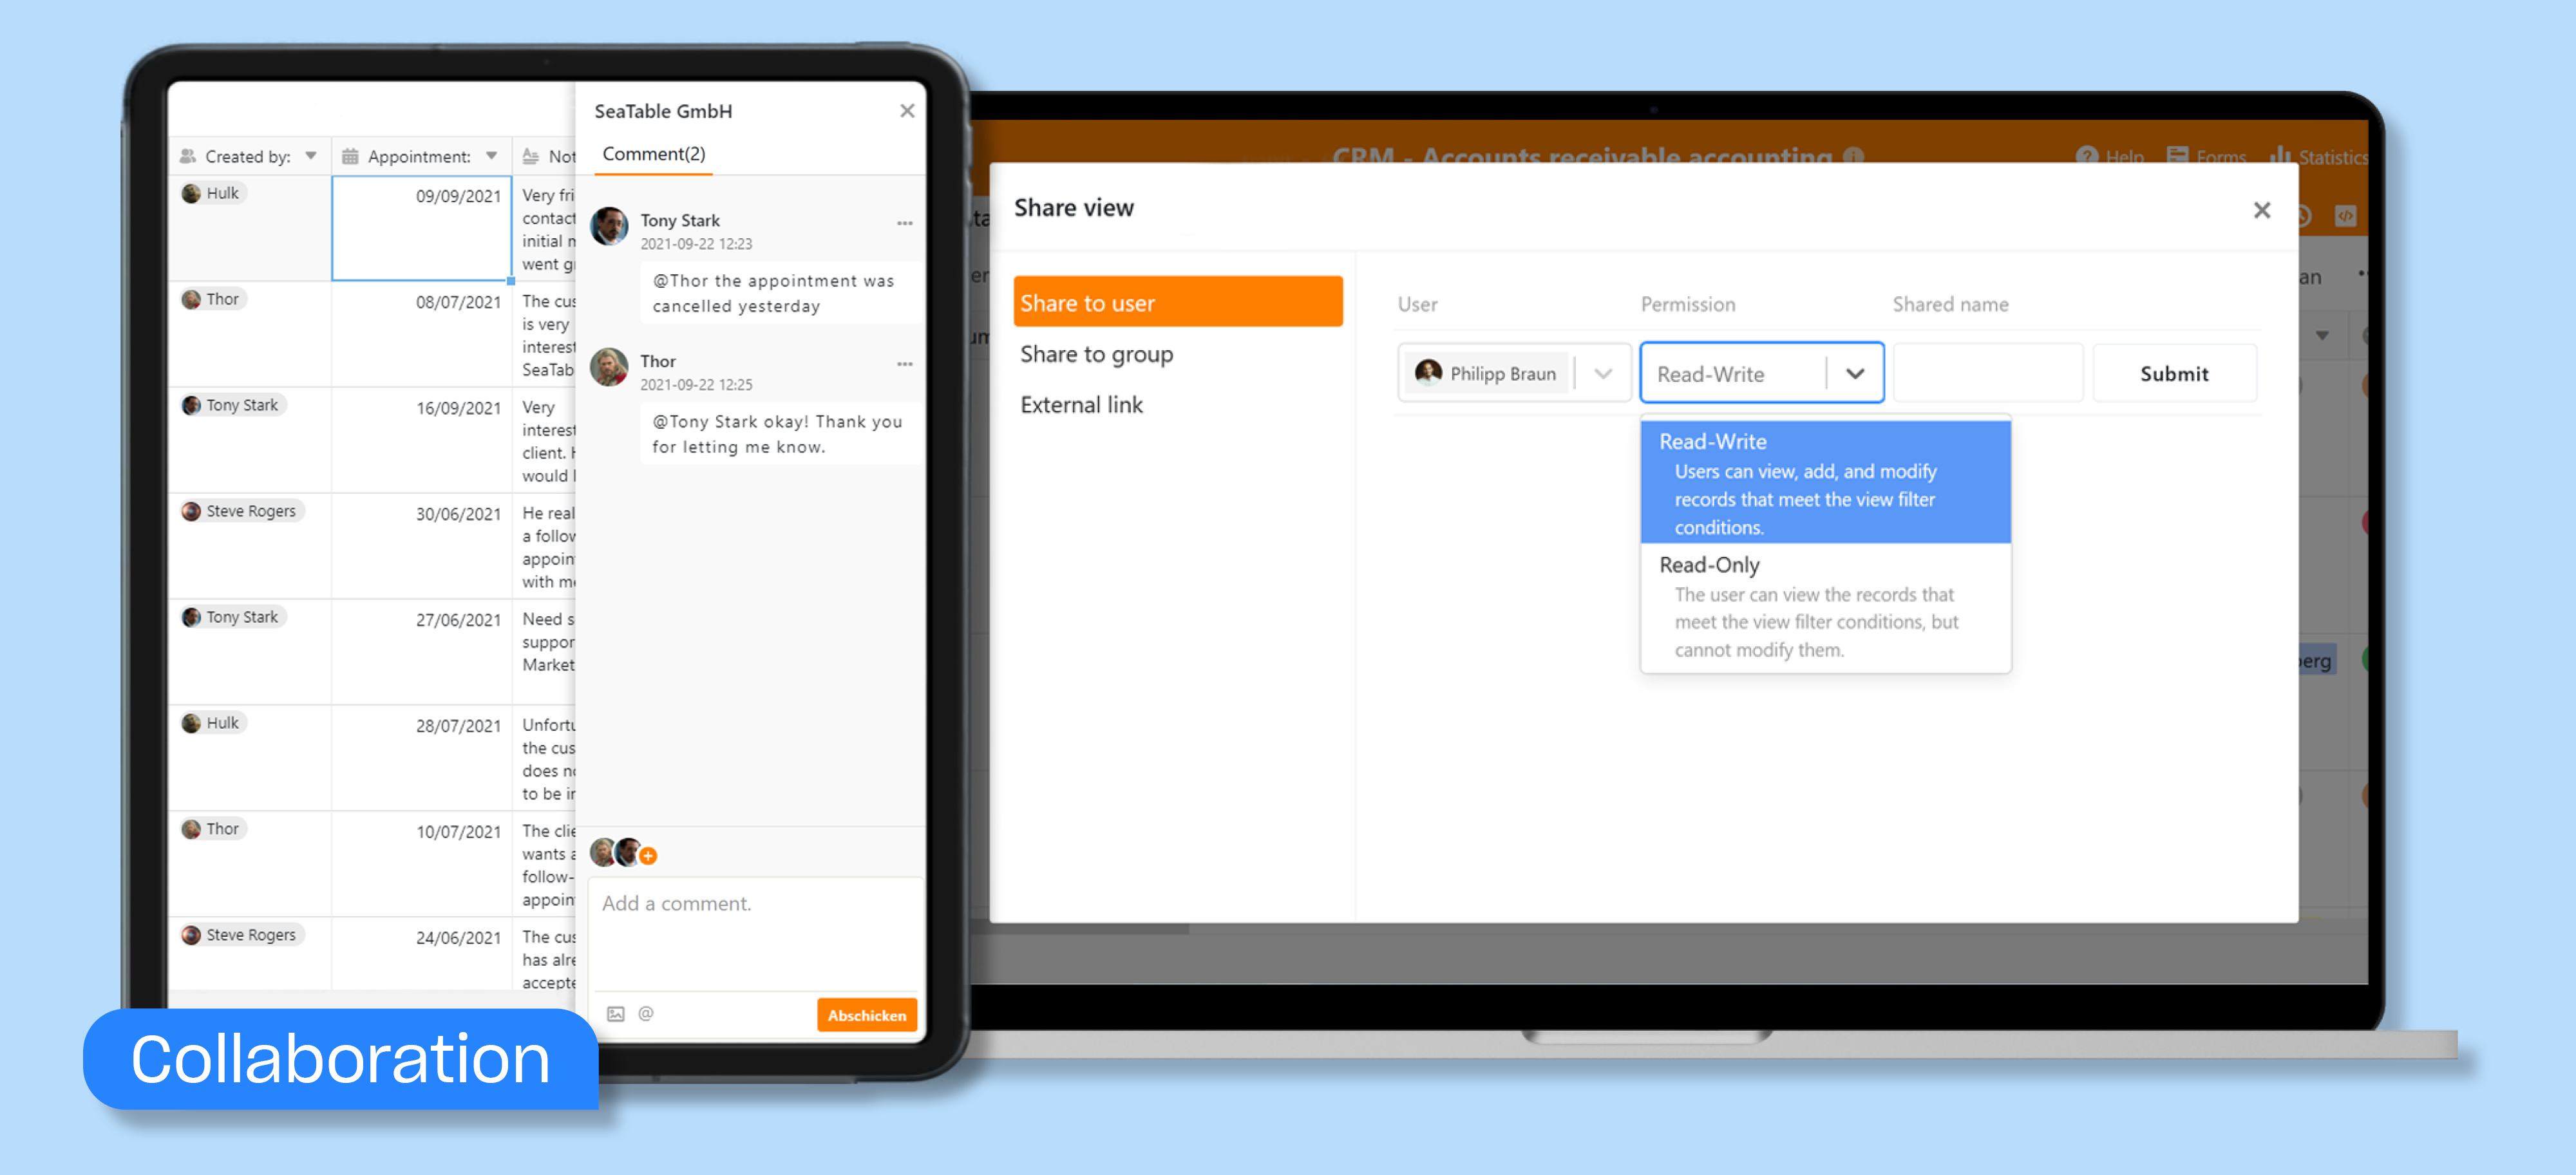 In just a few clicks, you can add your team members to SeaTable, assign tasks, mark individual team members, set permissions and comment on the various tasks. This way, everyone in the team always stays informed and knows what needs to be done.